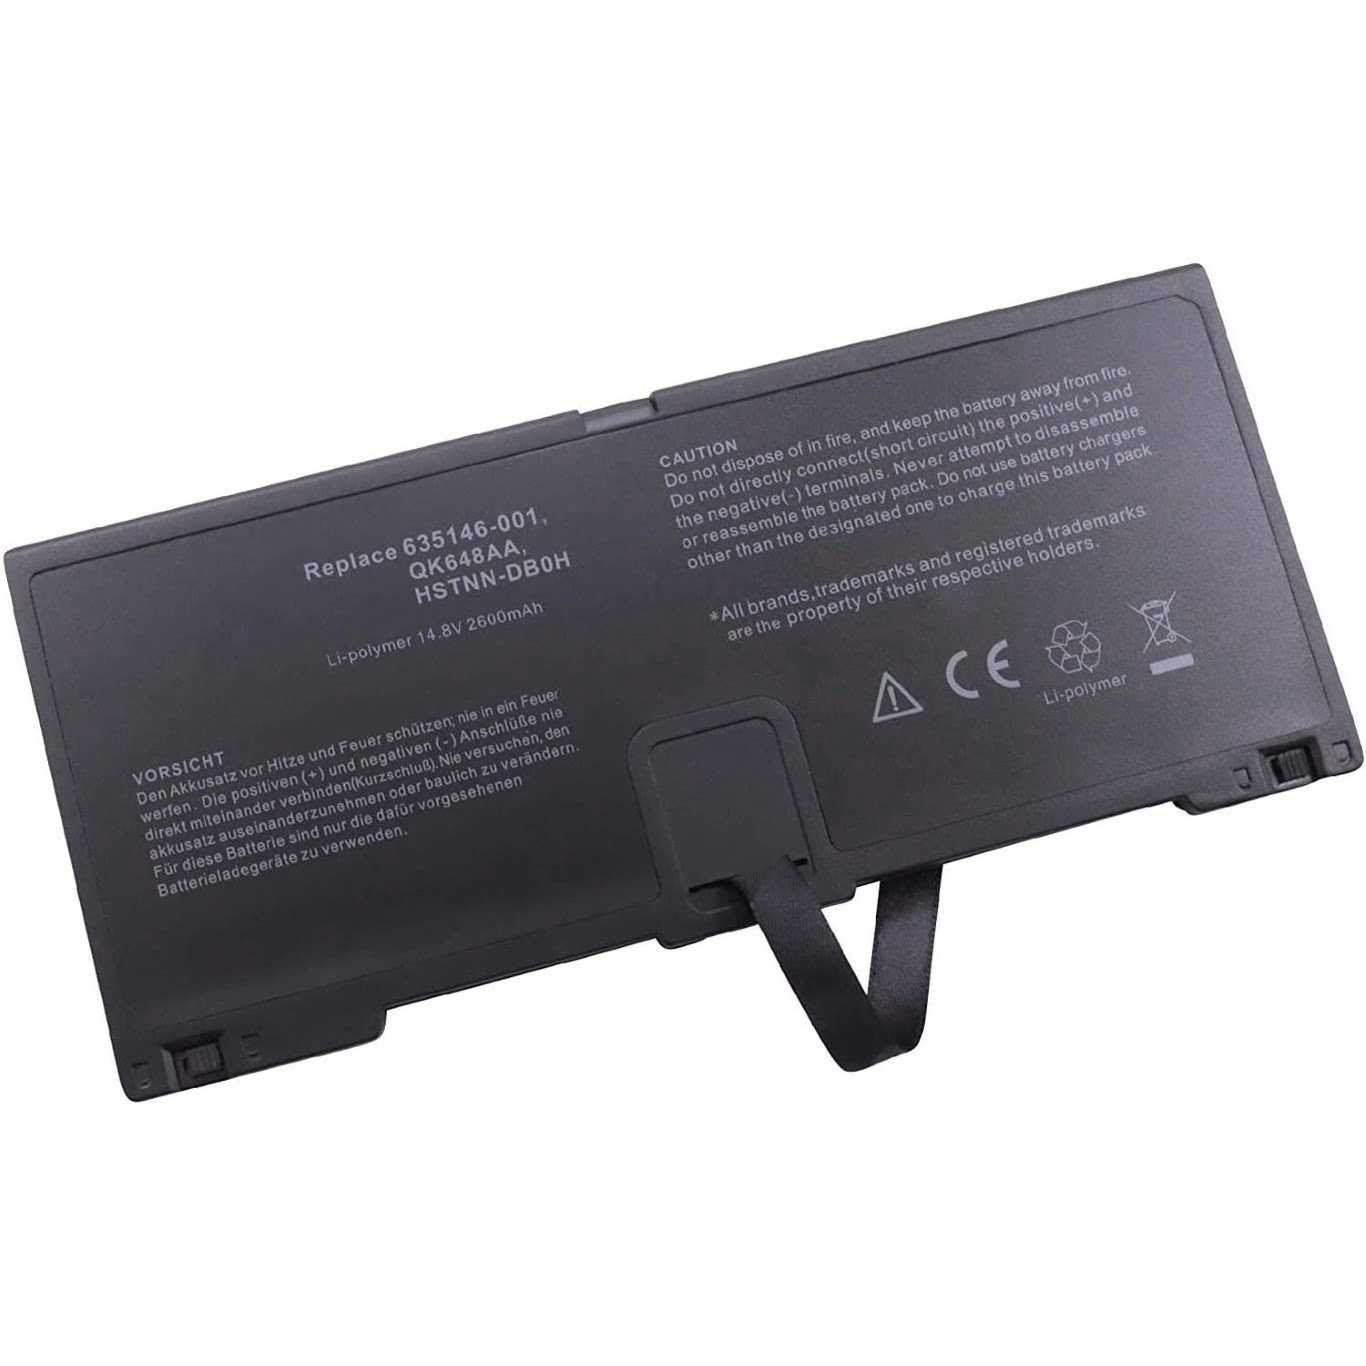 635146-001, FN04 replacement Laptop Battery for HP ProBook 5330m, 14.8 V, 4 cells, 2600mAh